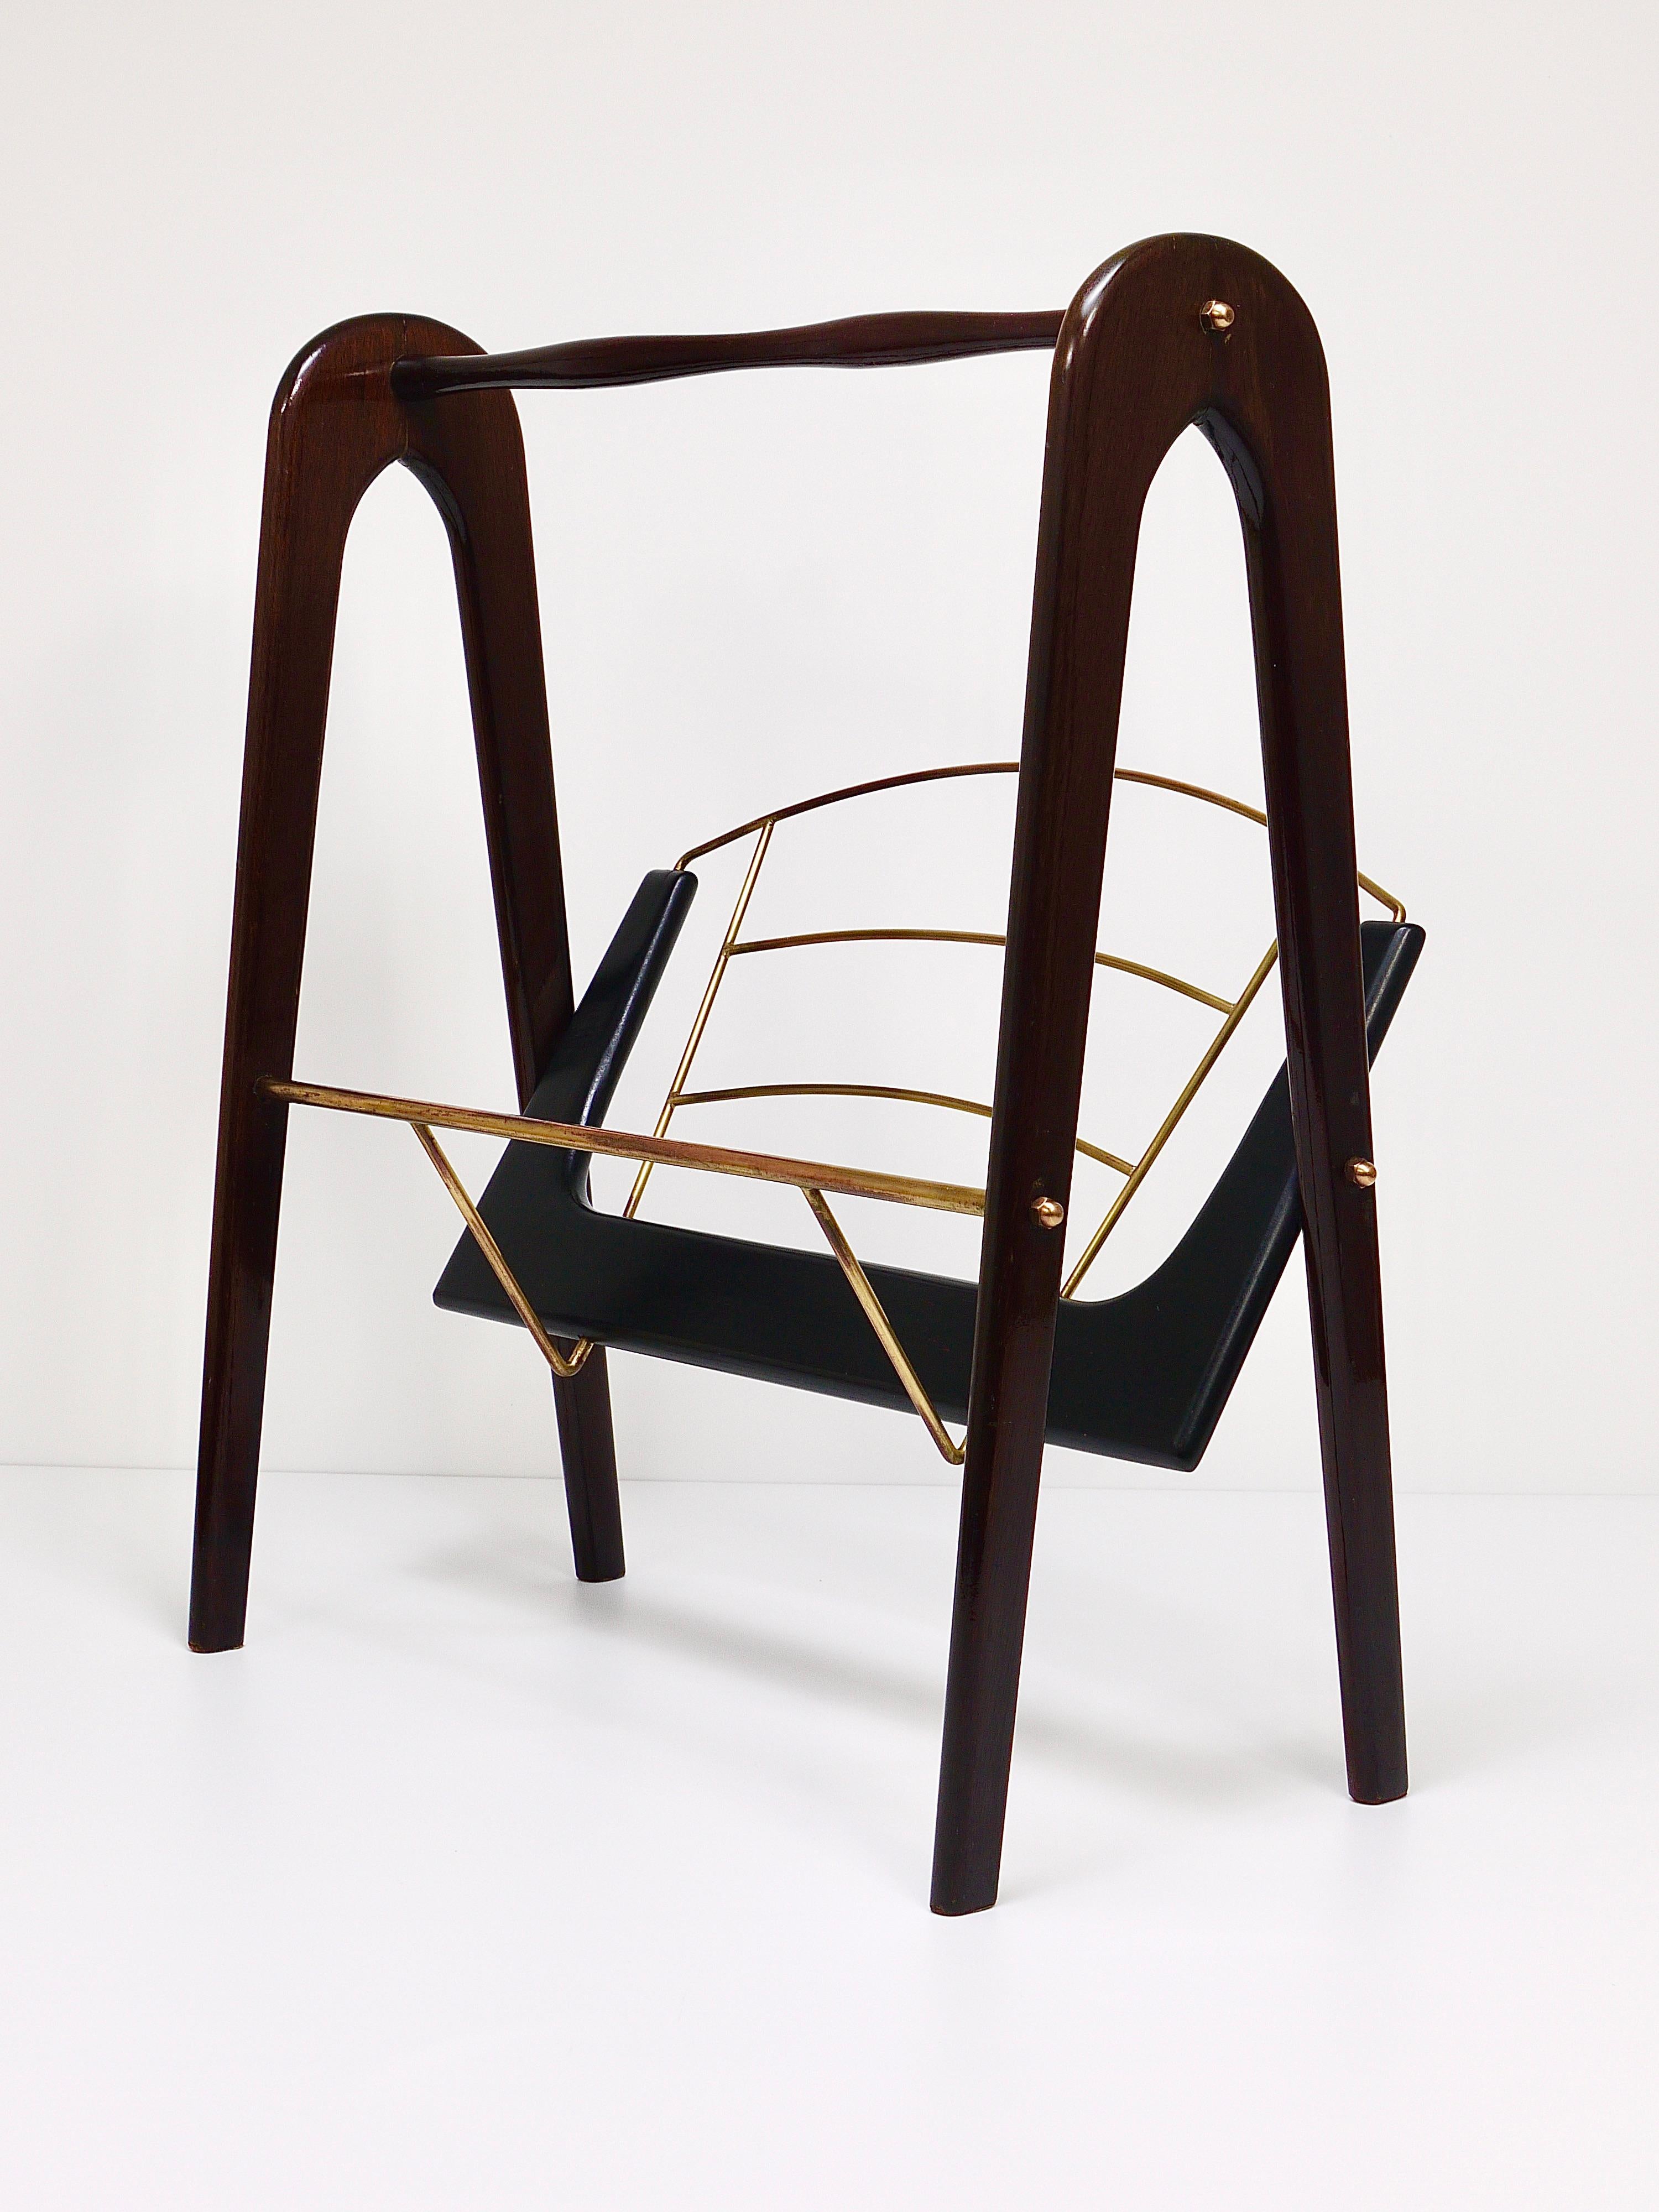 Cesare Lacca Midcentury Magazine Rack, Mahogany & Brass, Italy, 1950s For Sale 2